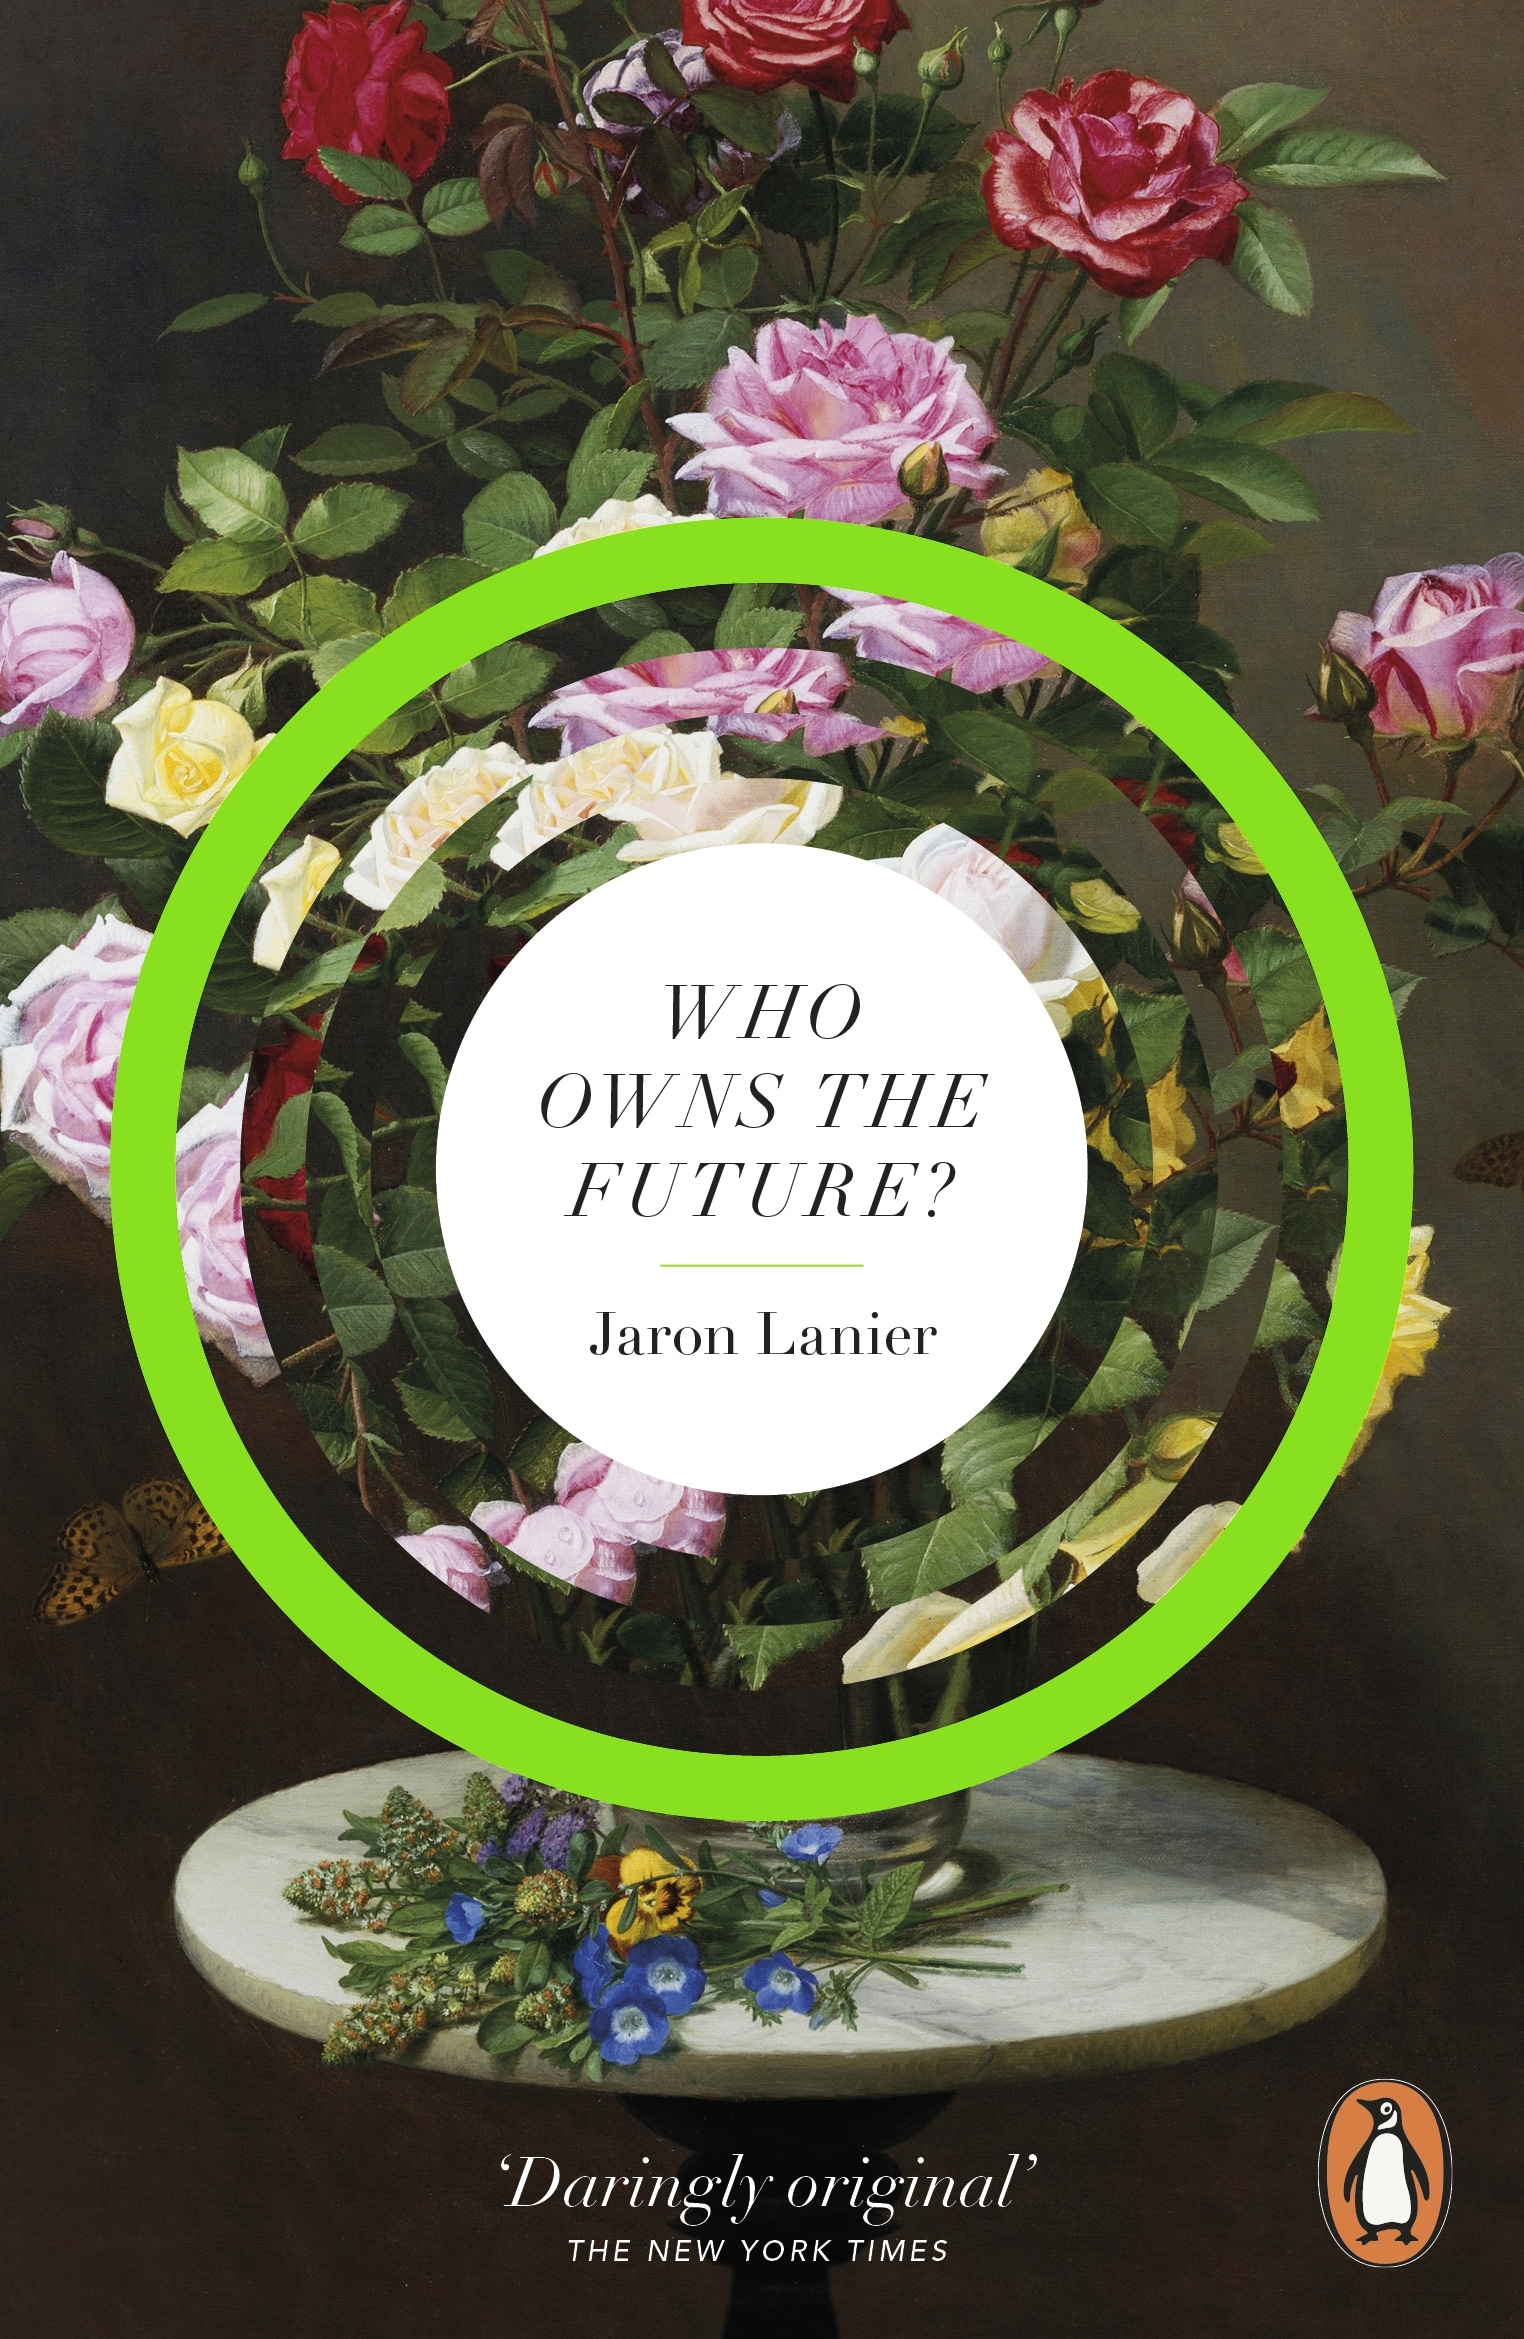 Book “Who Owns The Future?” by Jaron Lanier